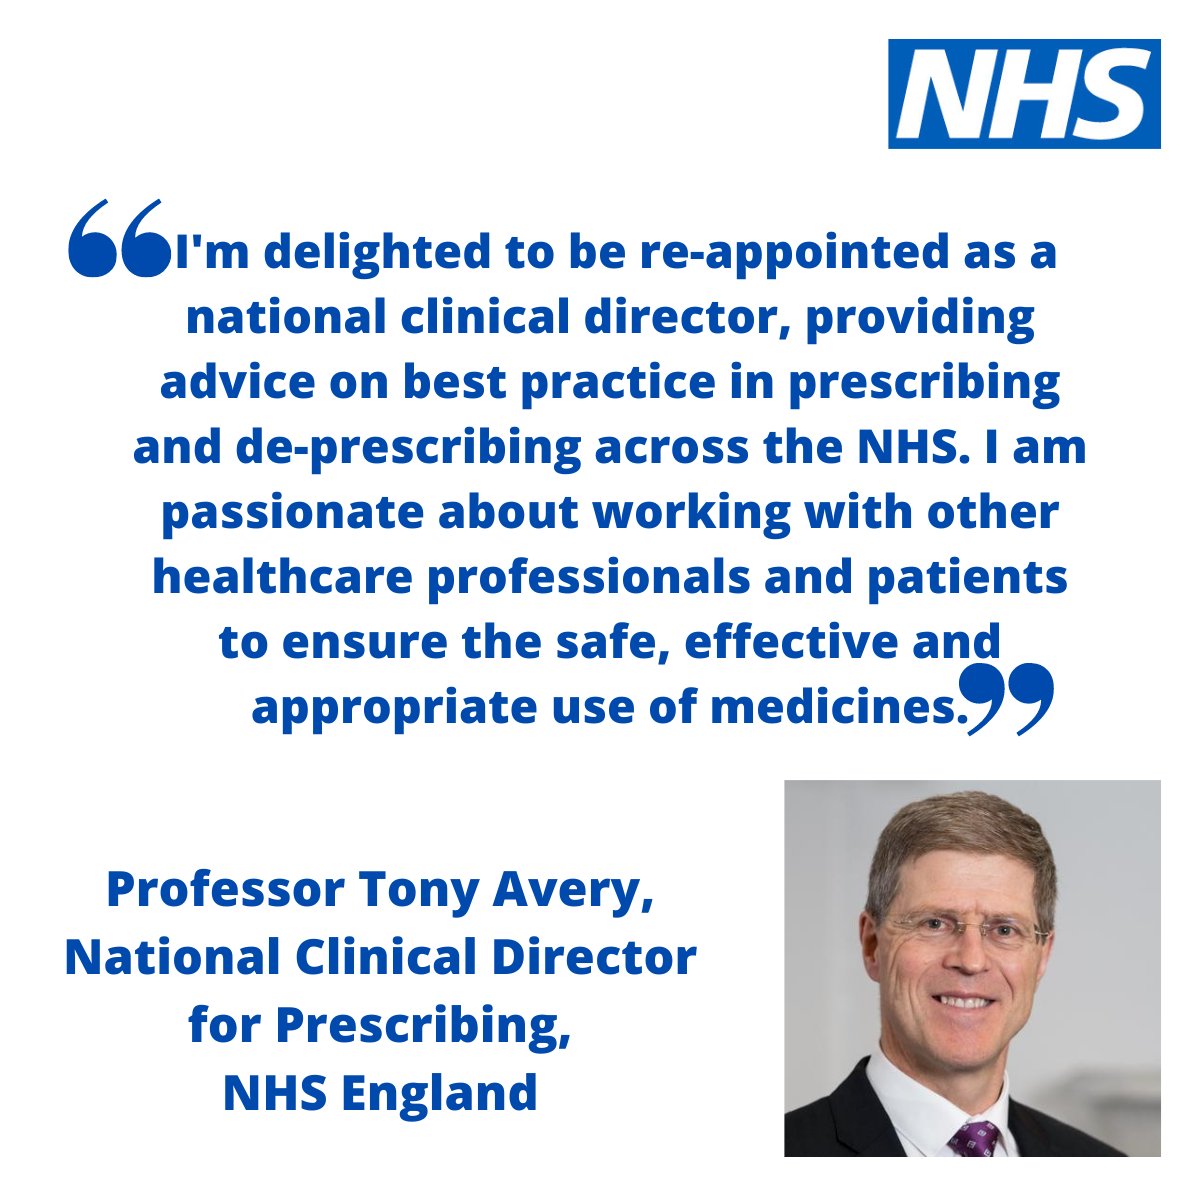 Congratulations to @TonyAvery1 who has been re-appointed @NHSEngland National Clinical Director for Prescribing. Read more about recent National Clinical Director appointments here: england.nhs.uk/2024/04/nhs-an…